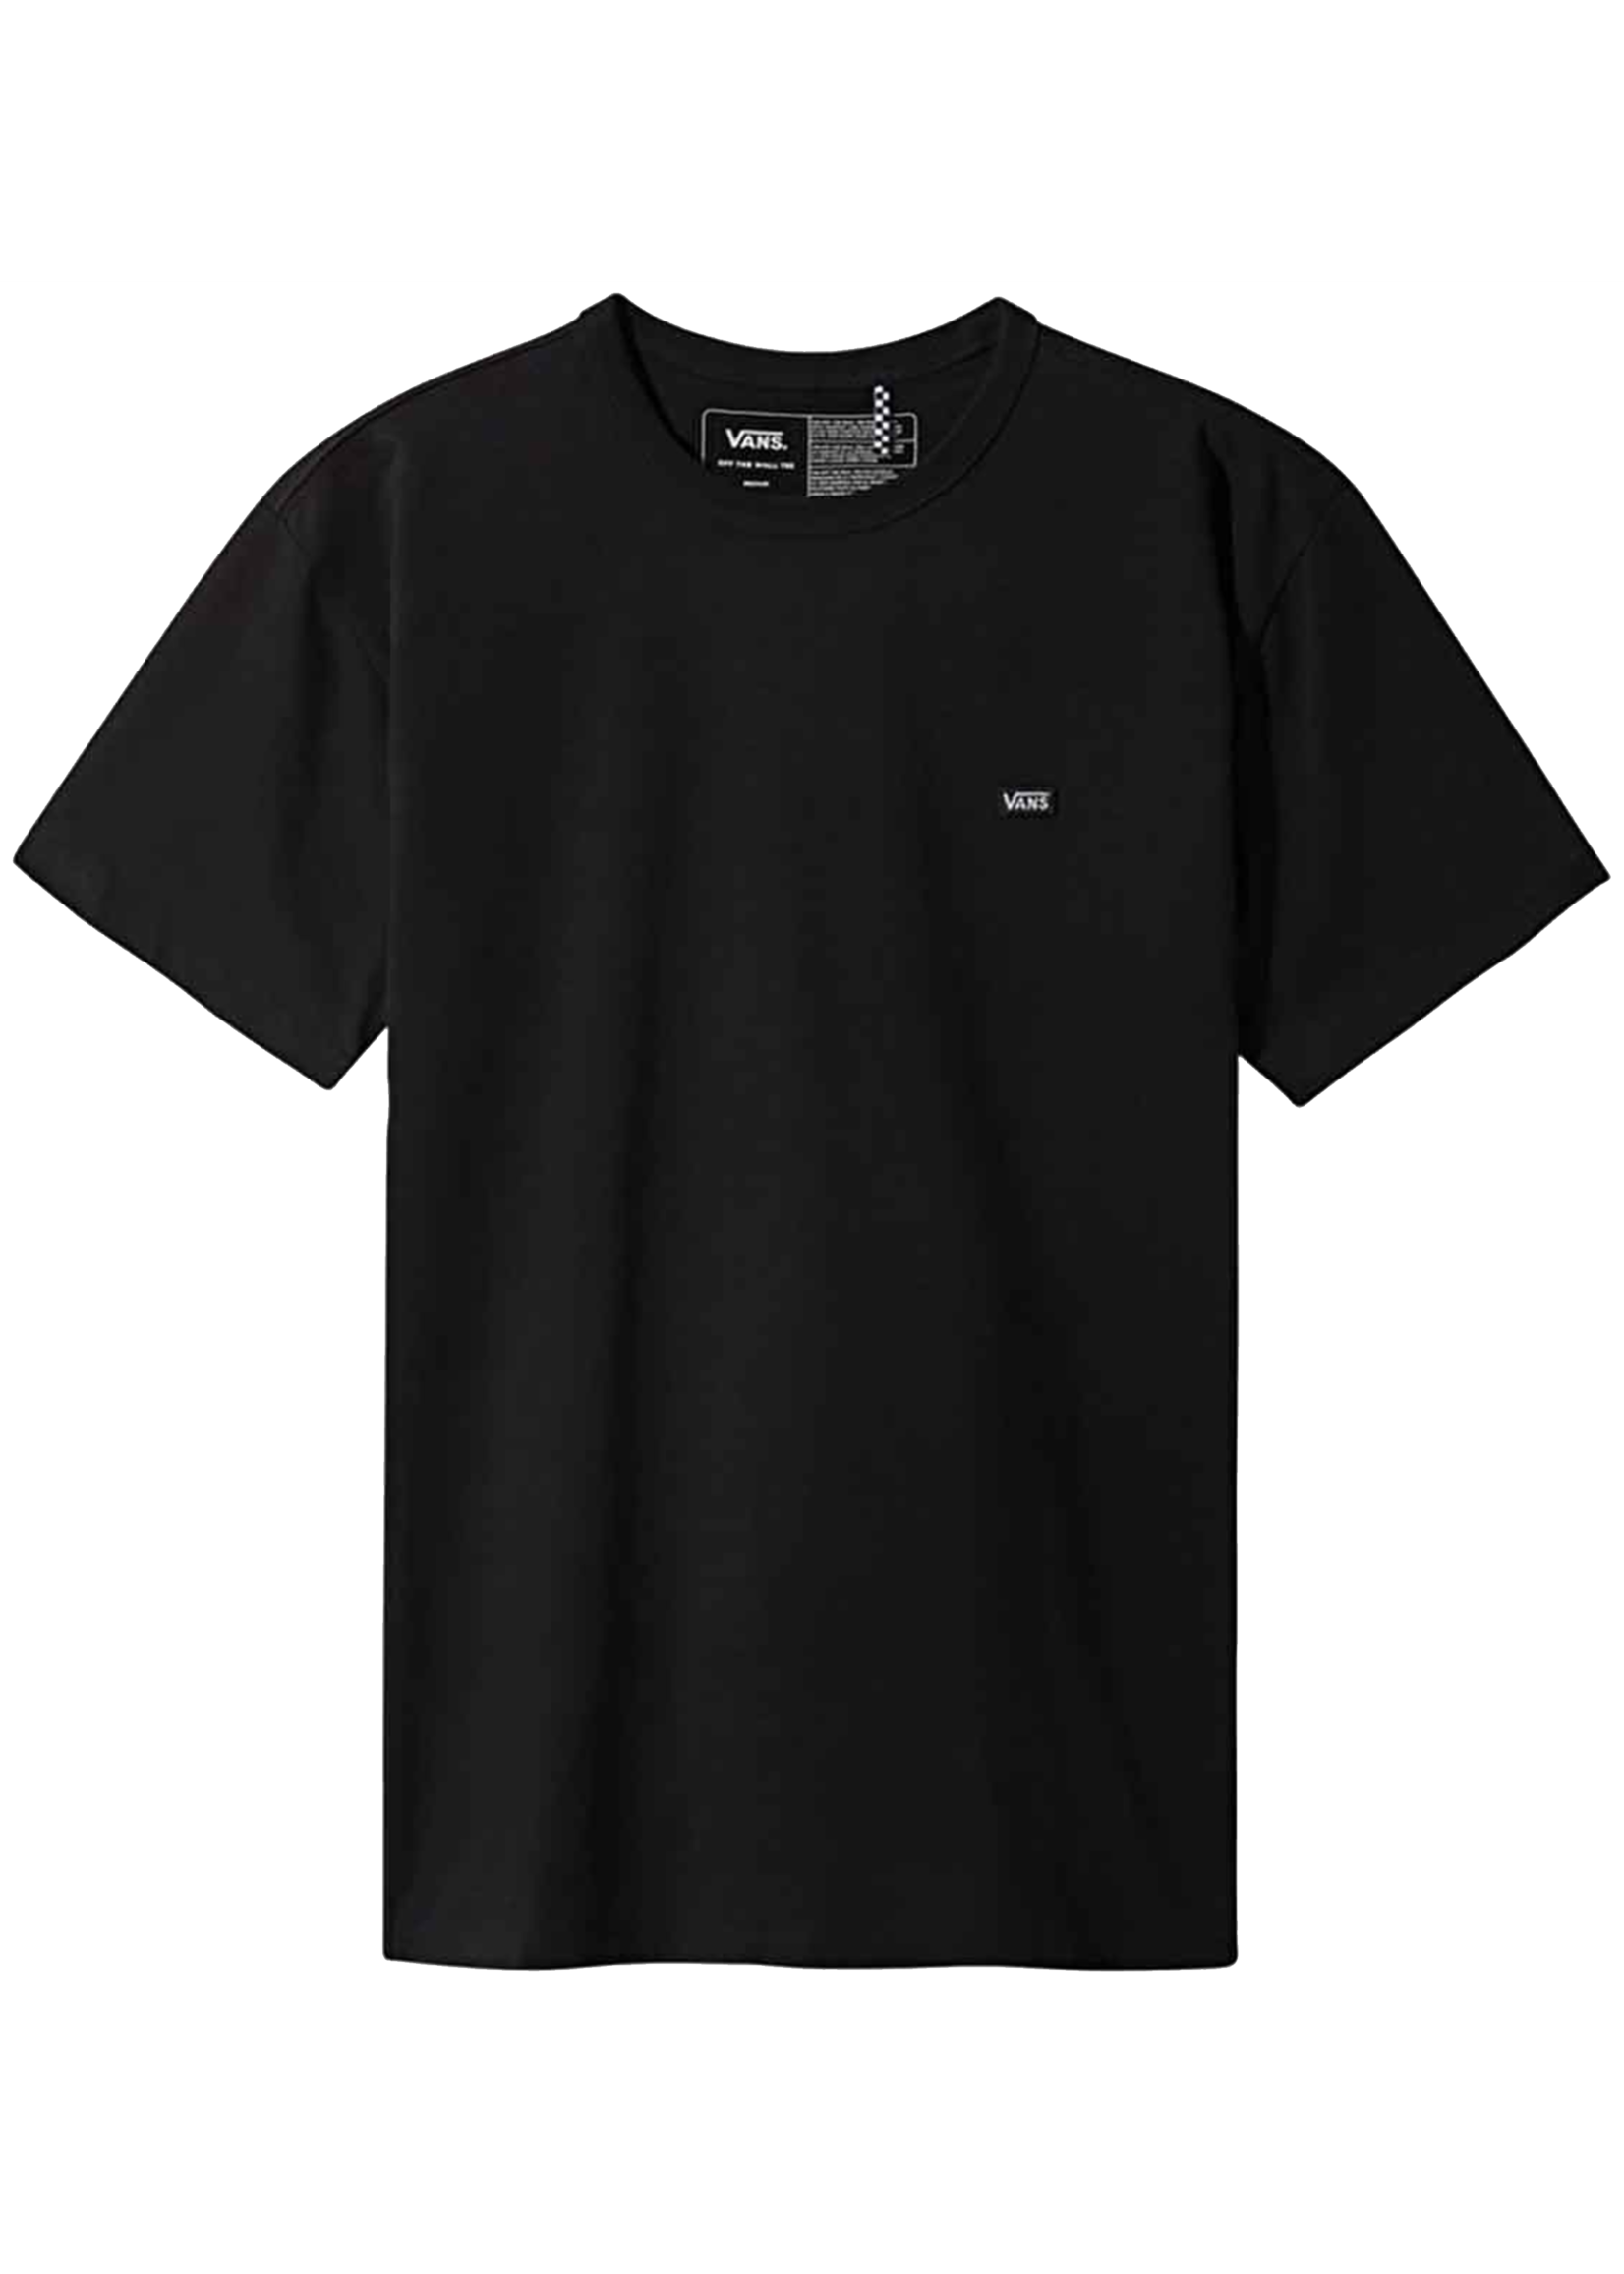 Vans Off The Wall Classic Tee Black